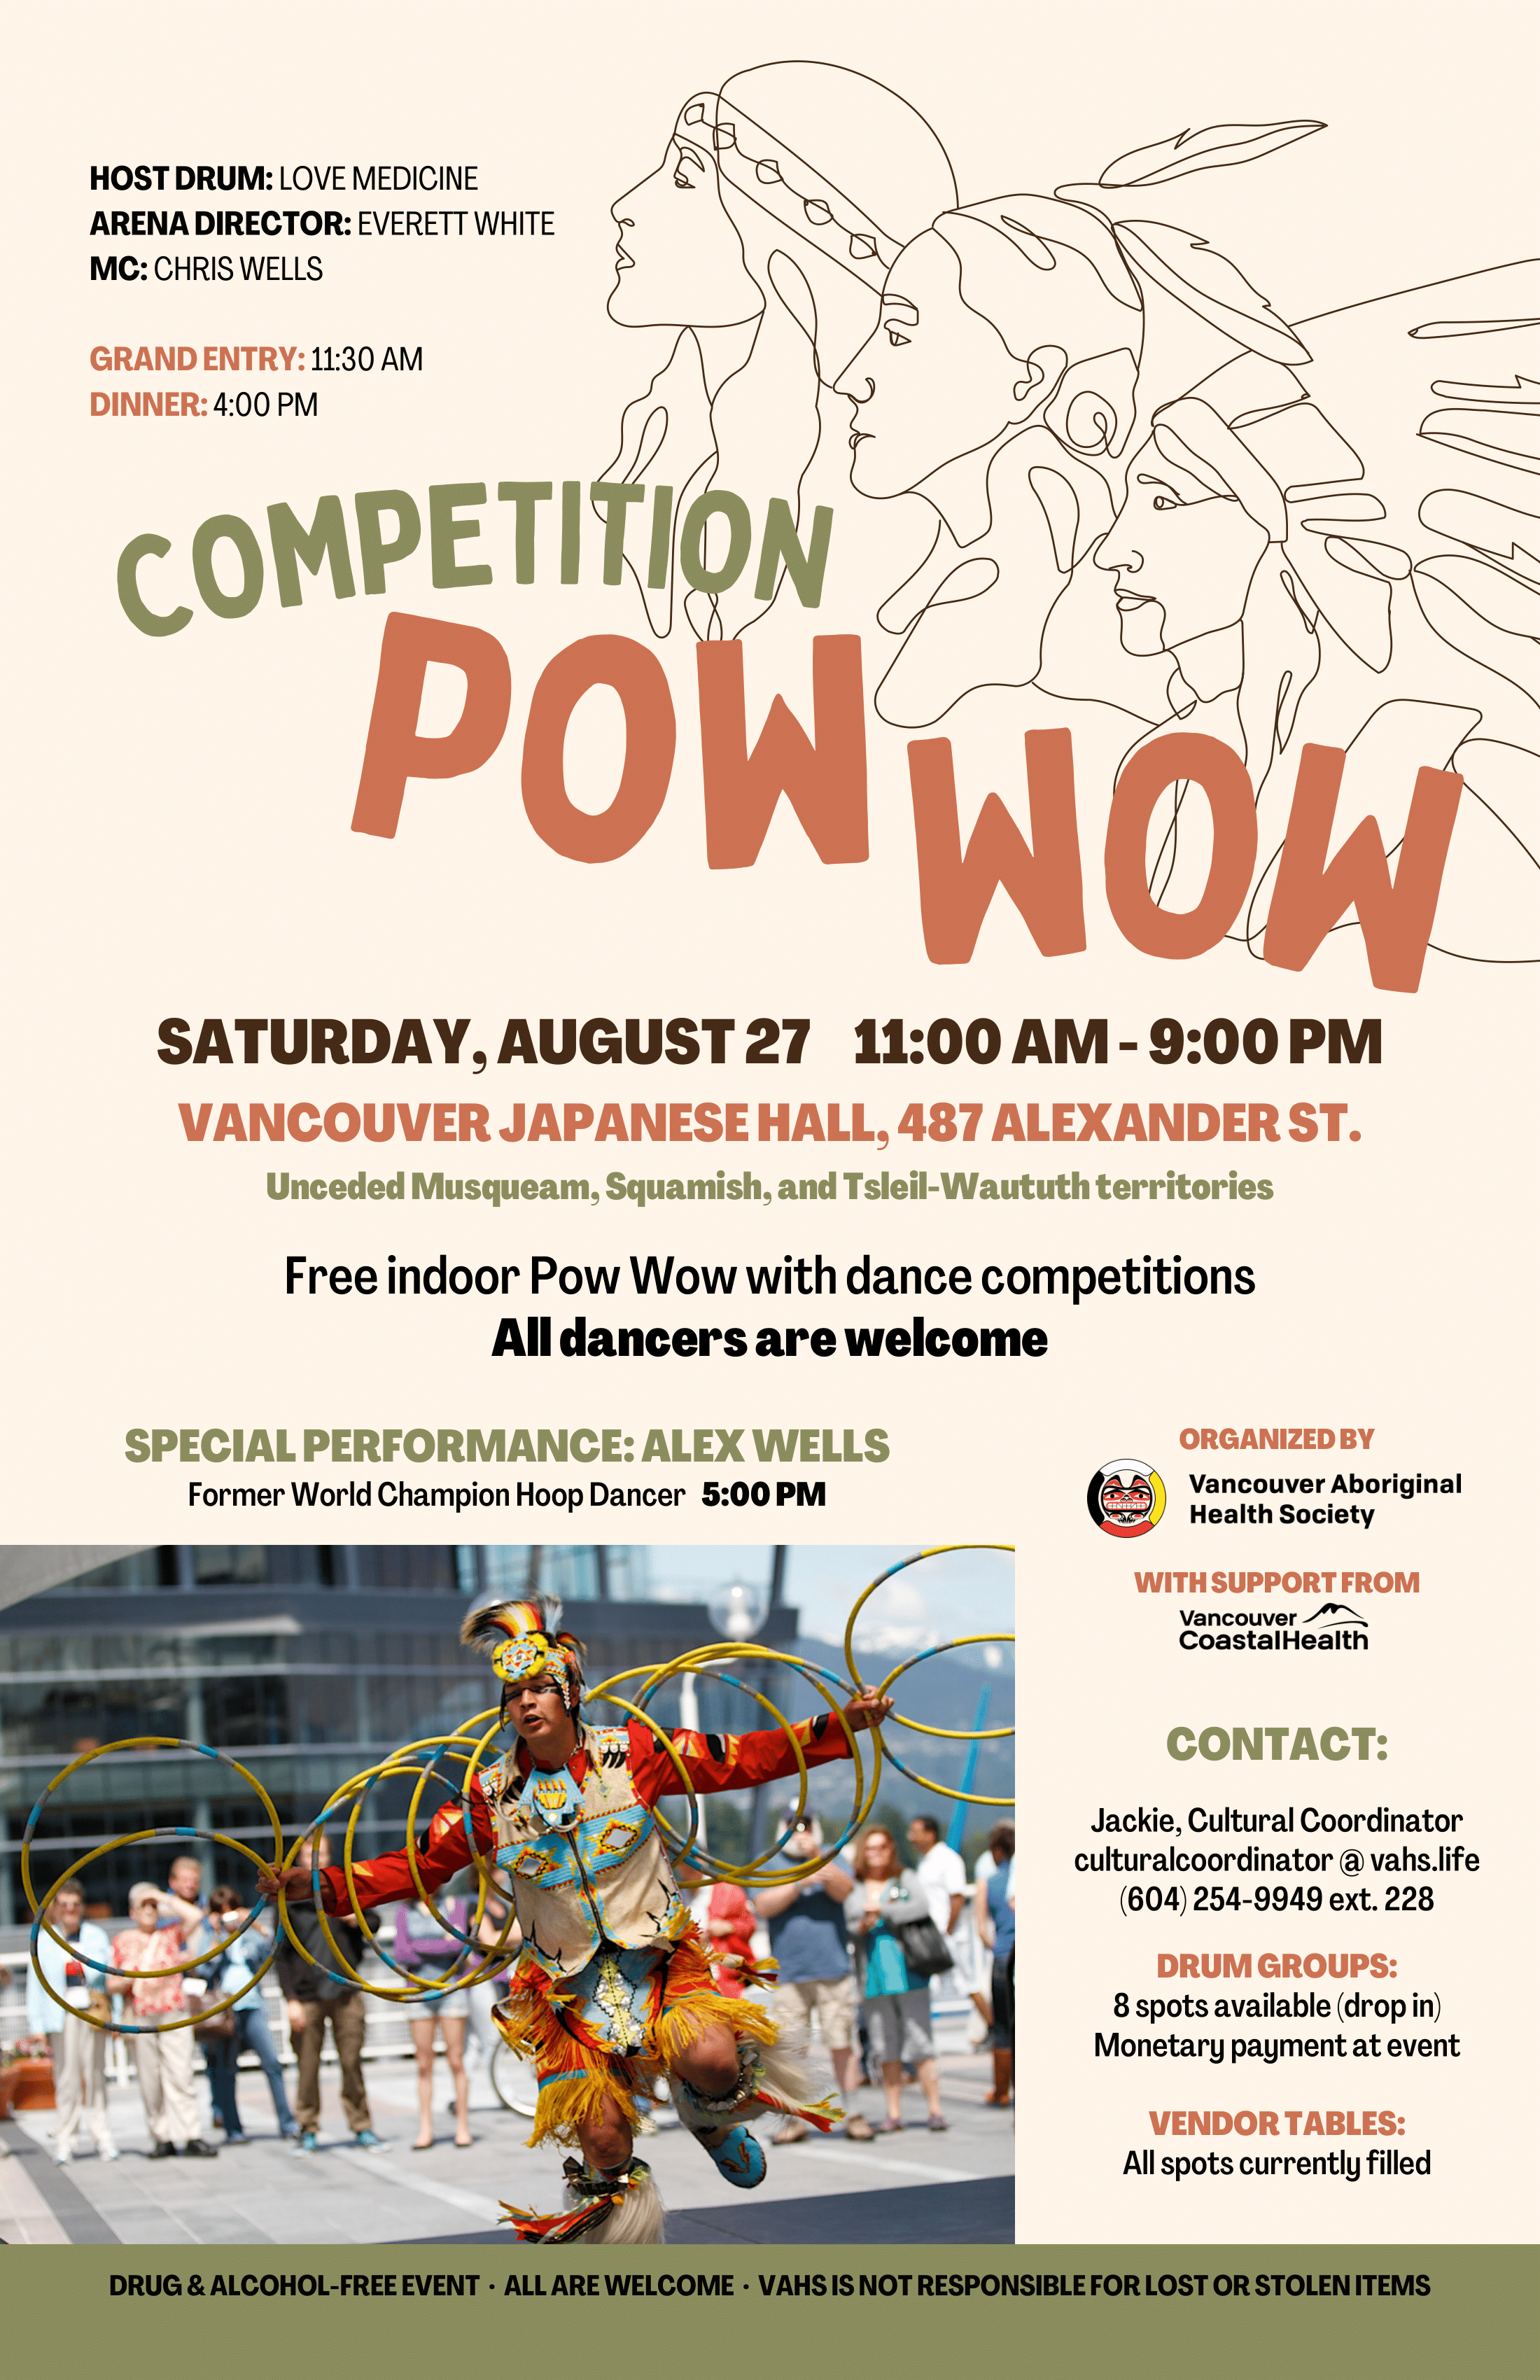 pow wow, saturday august 27 from 11:00 AM to 9:00 PM at vancouver japanese hall (487 alexander st.)